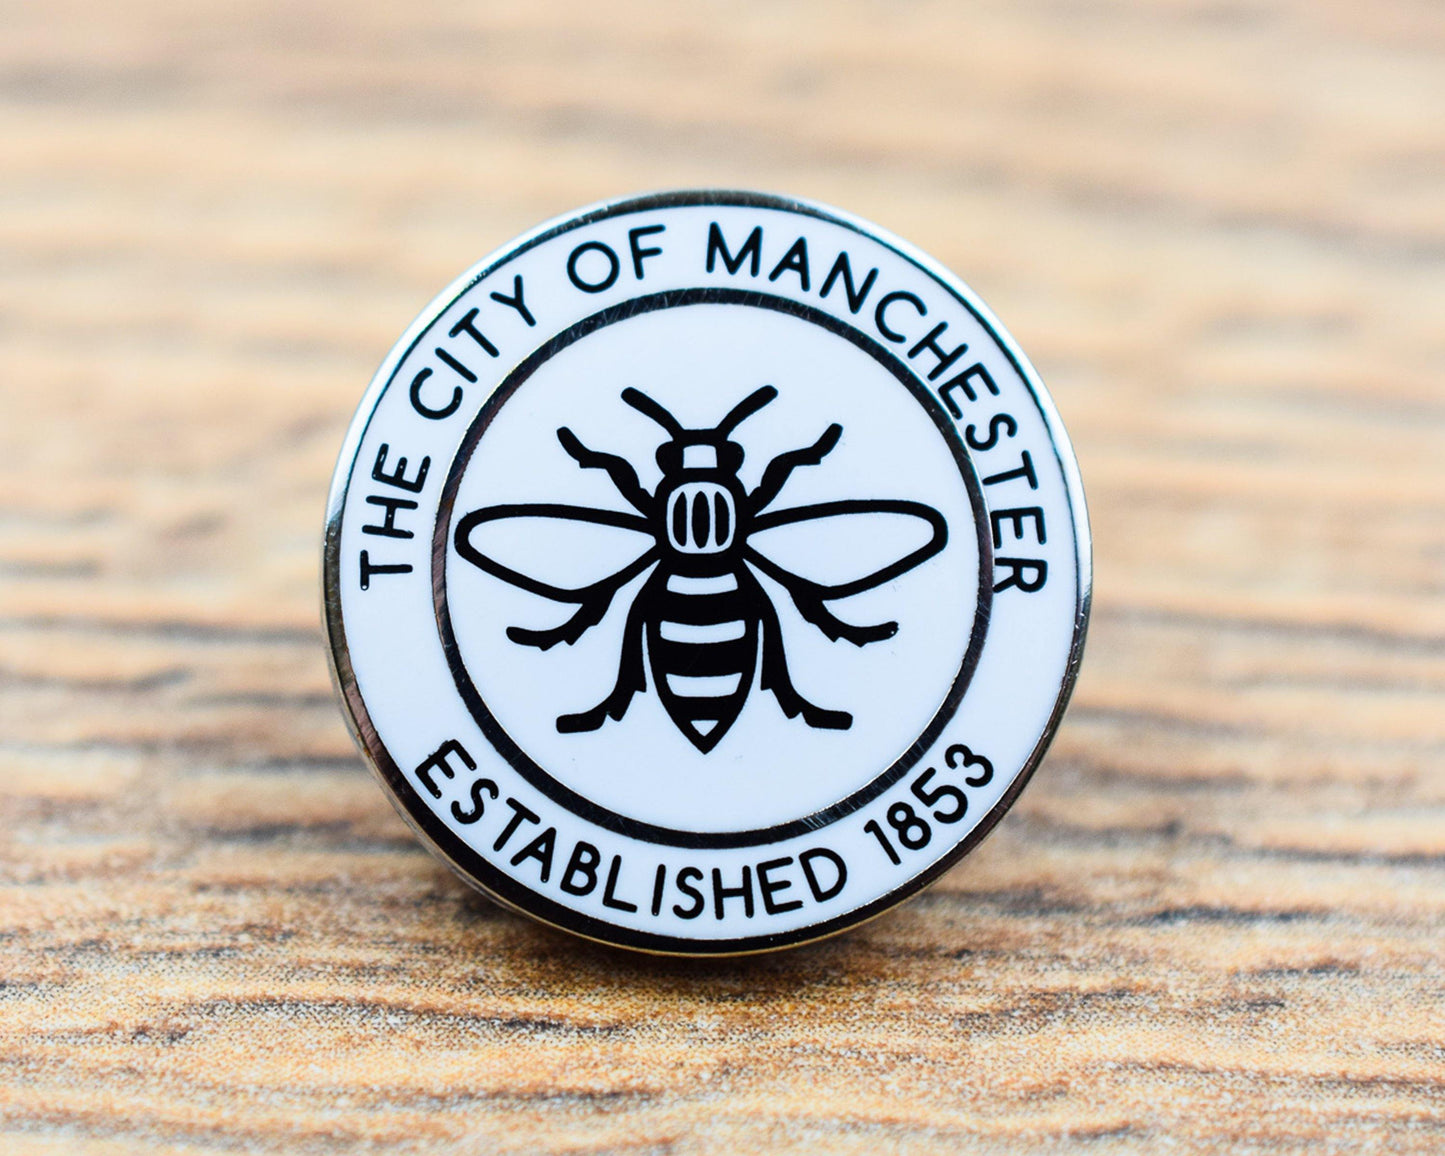 Manchester Established 1853 Pin - The Manchester Shop